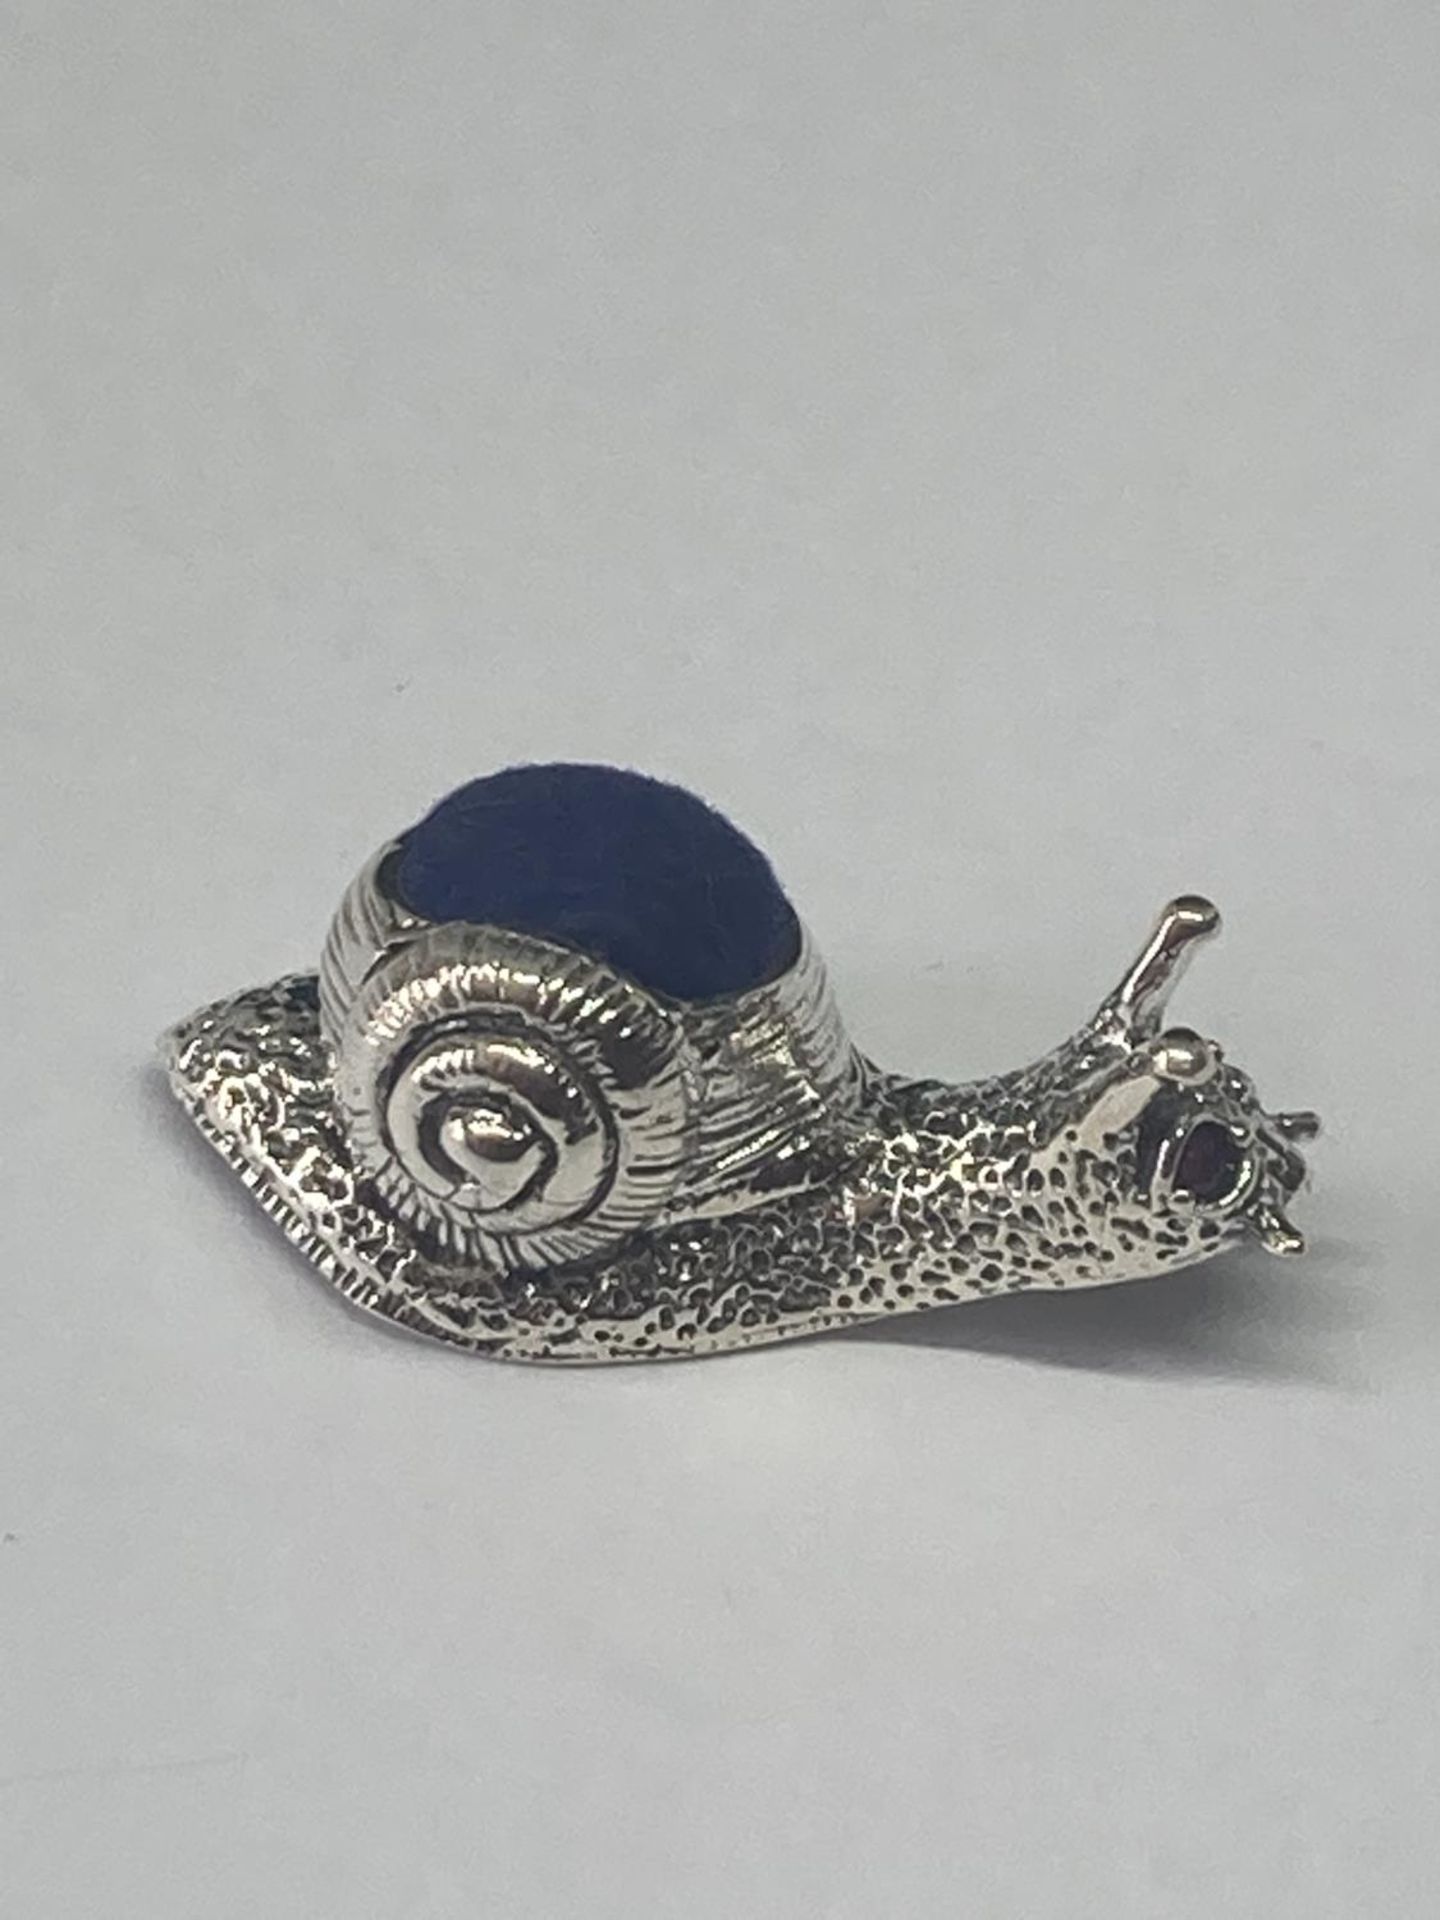 A MARKED SILVER PIN CUSHION IN THE FORM OF A SNAIL - Image 2 of 6